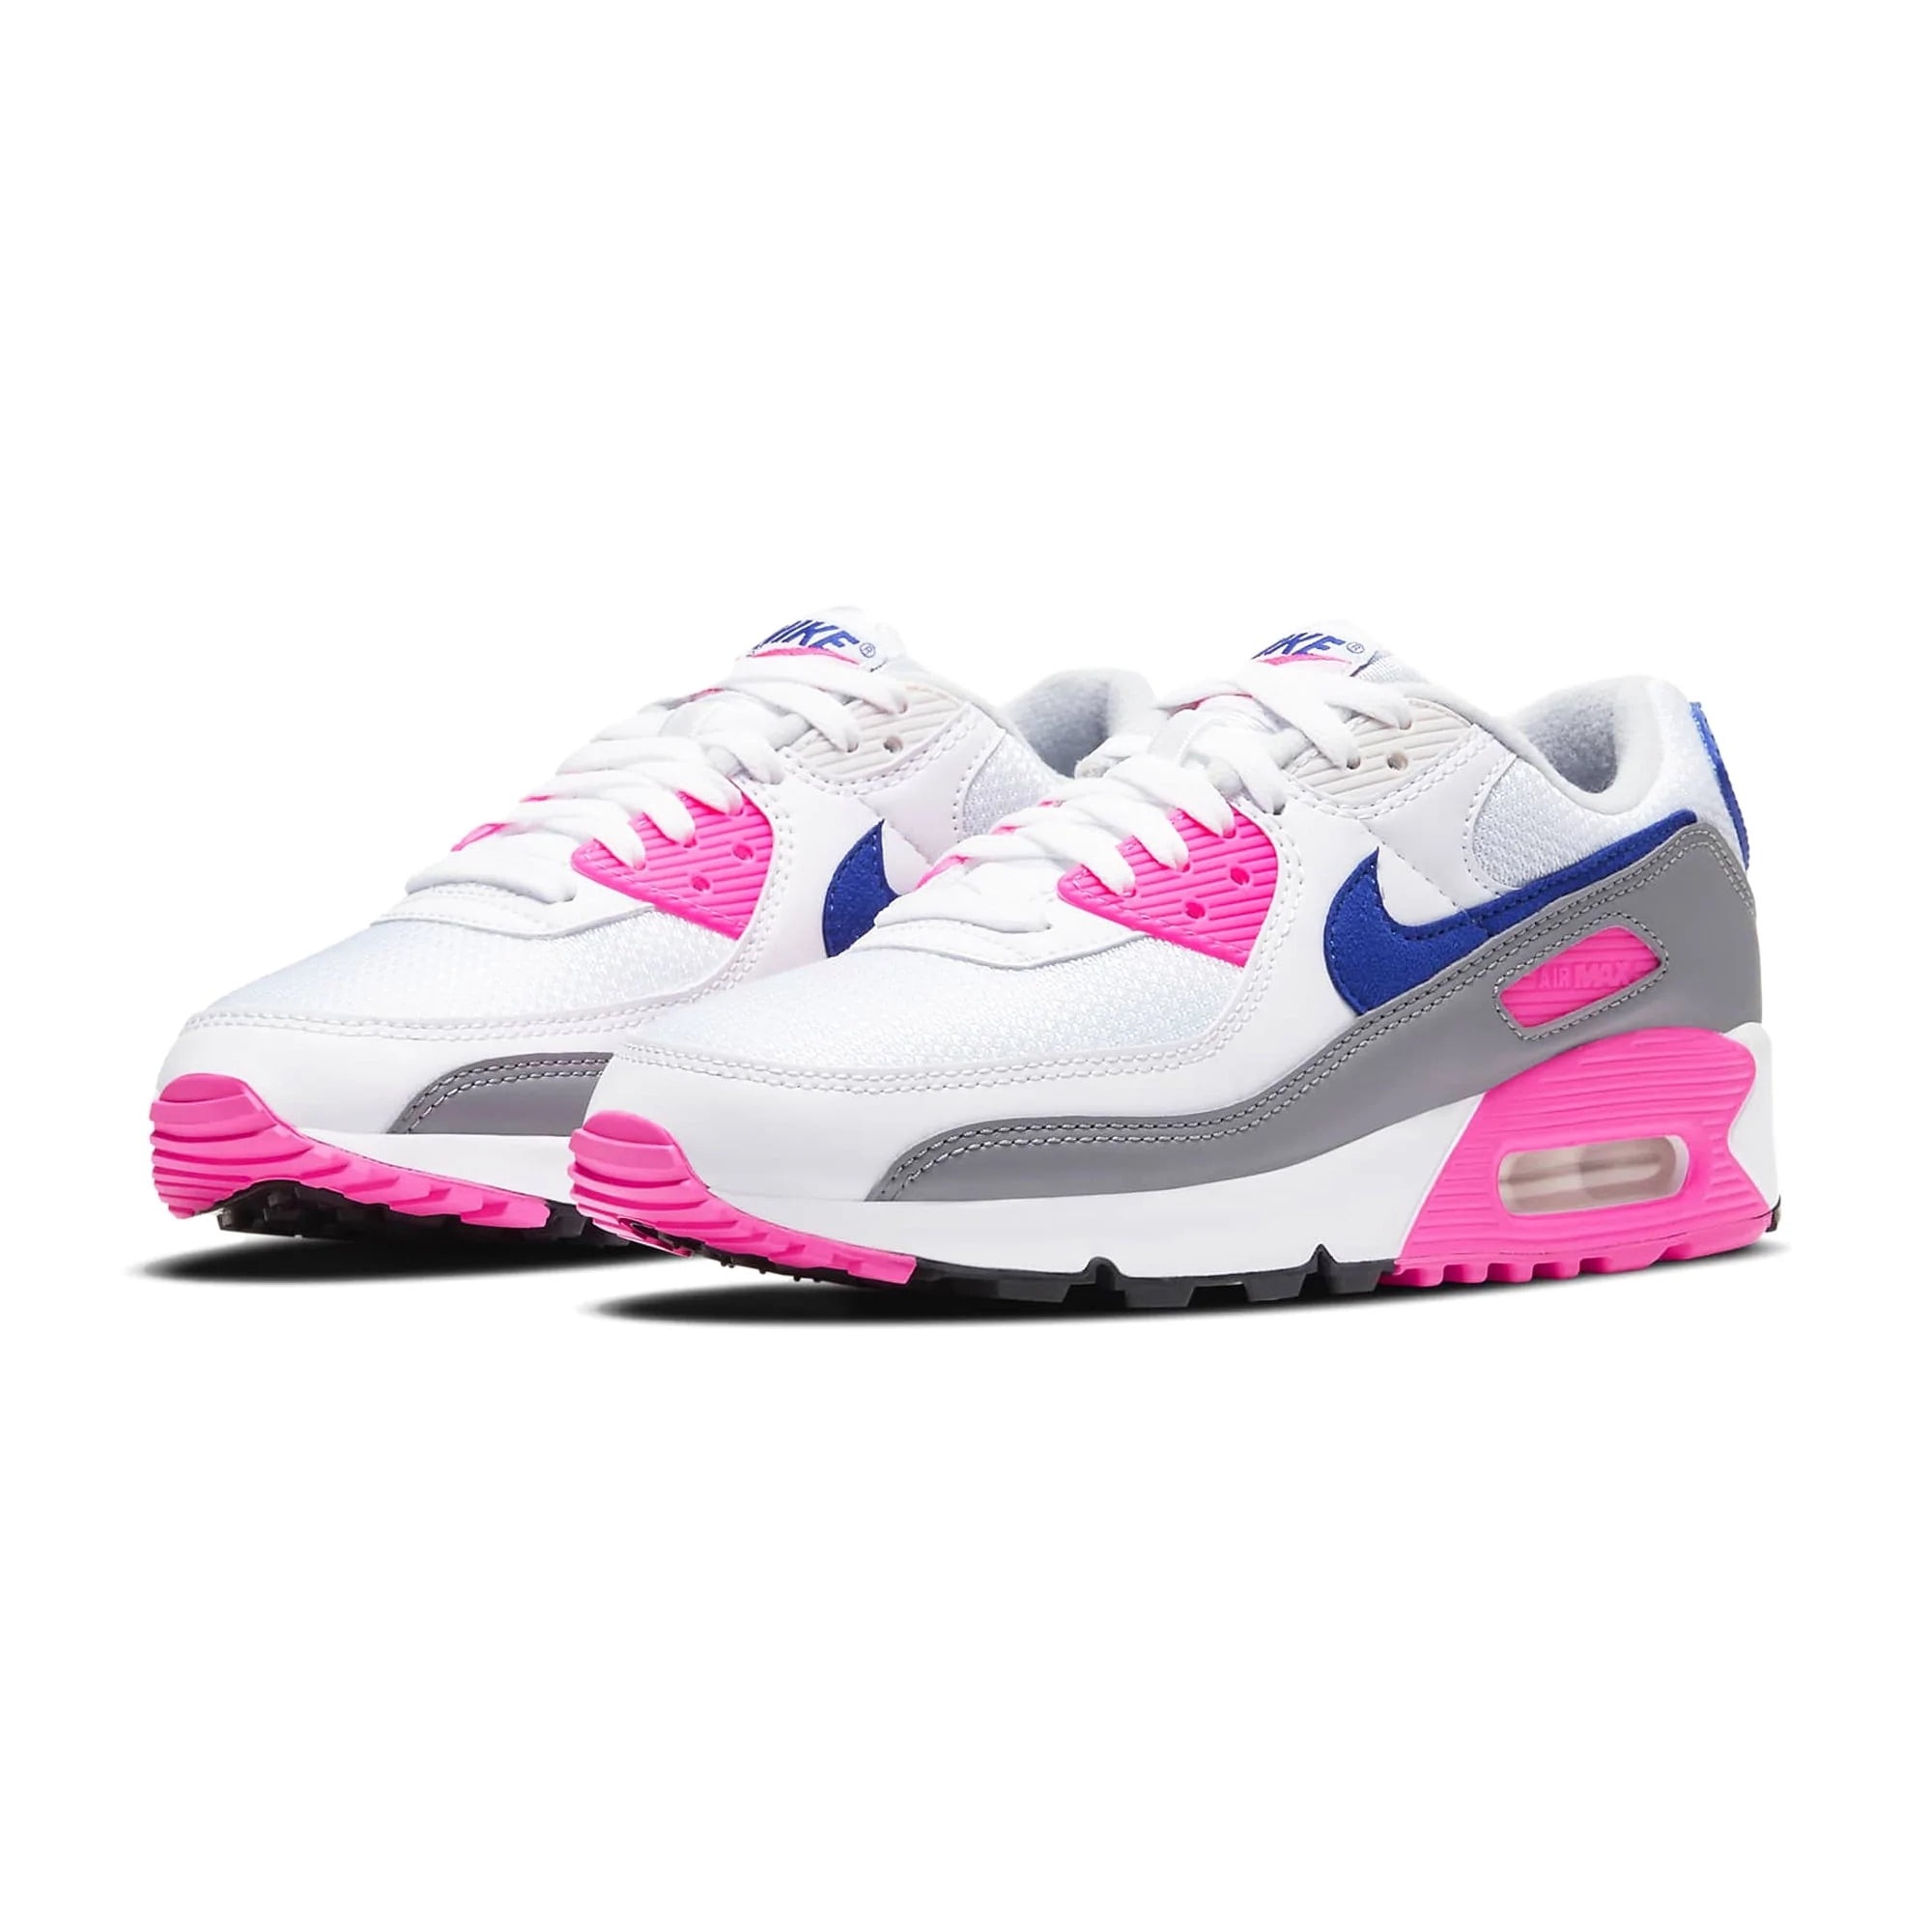 NIKE AIR MAX SEQUENT 3 WOMENS Size 6 BLUE FURY/WHITE/GLACIER BLUE  [908993-404]